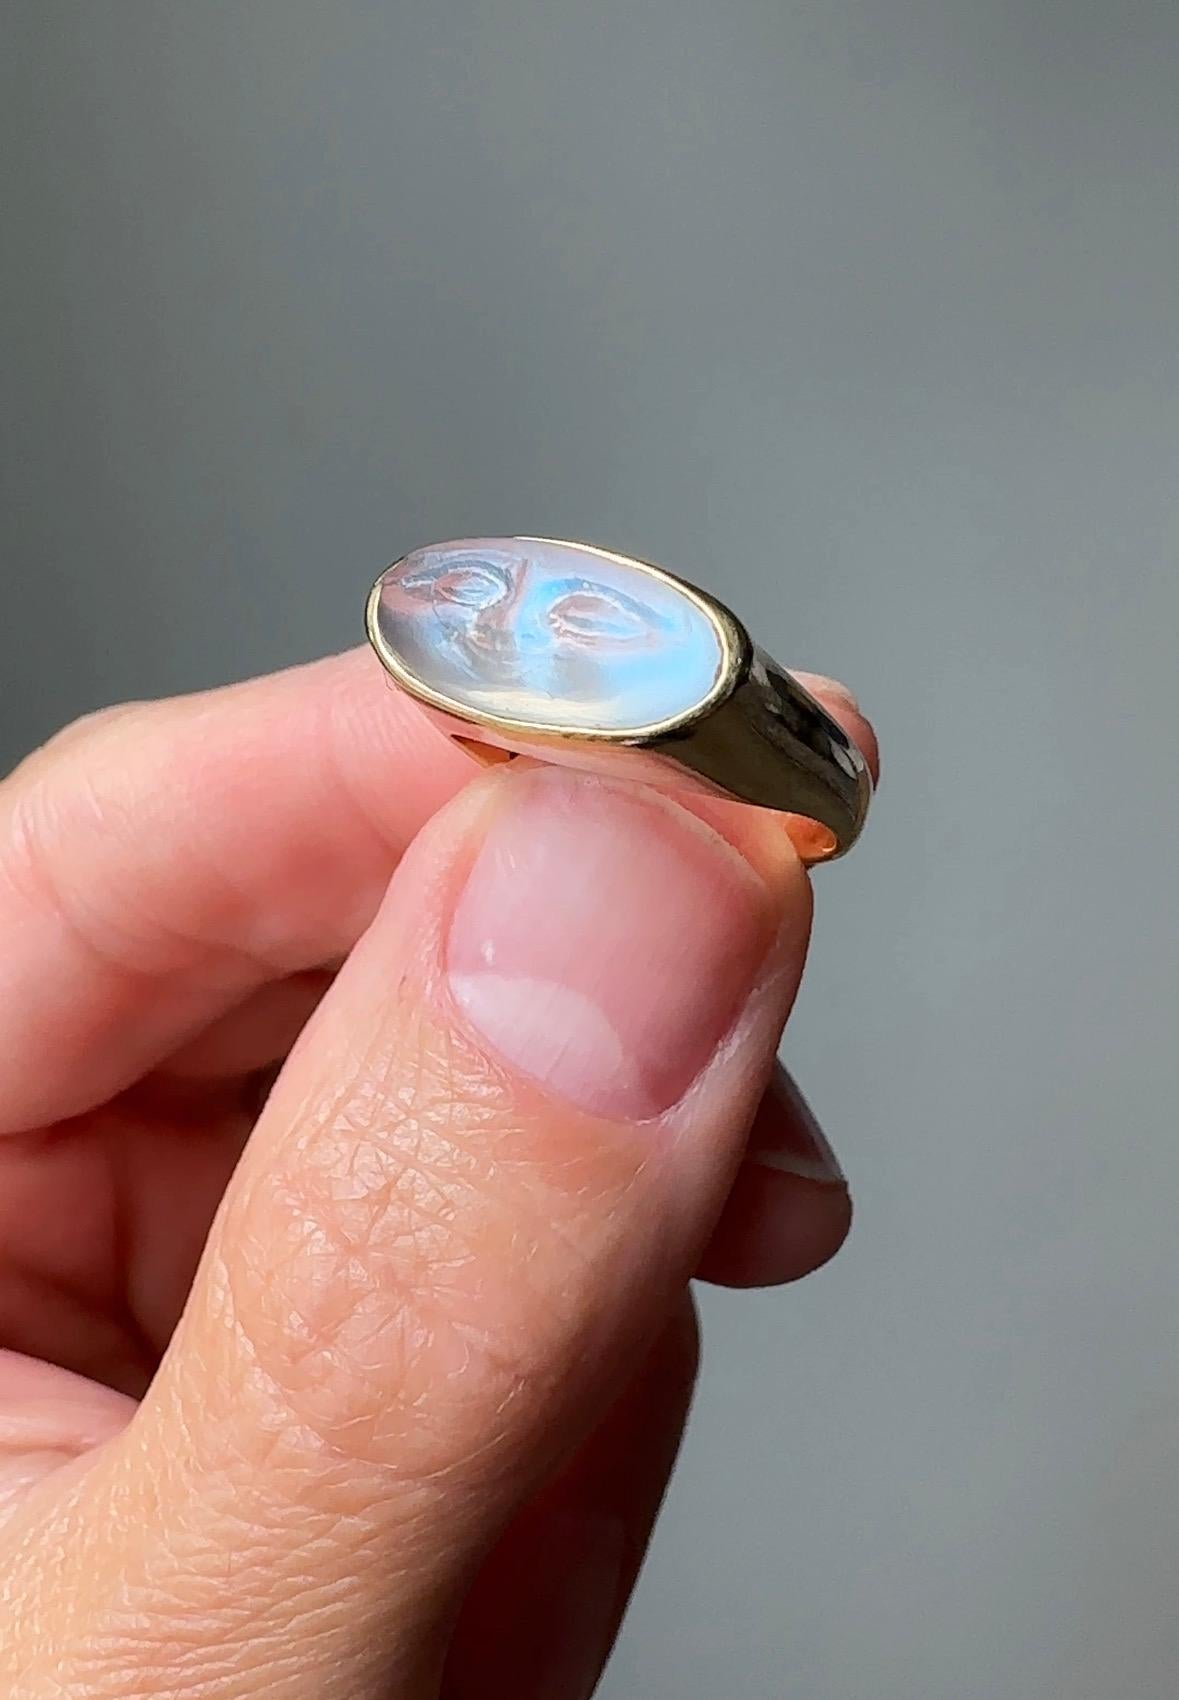 Both luminous and beautifully carved this whimsical vintage man-in-the-moon is something special. 🌙 The moonstone is transparent with a magical blue luster mounted in 14k yellow gold.  Currently a ring size 5 3/4.

 

Weight: 4.9